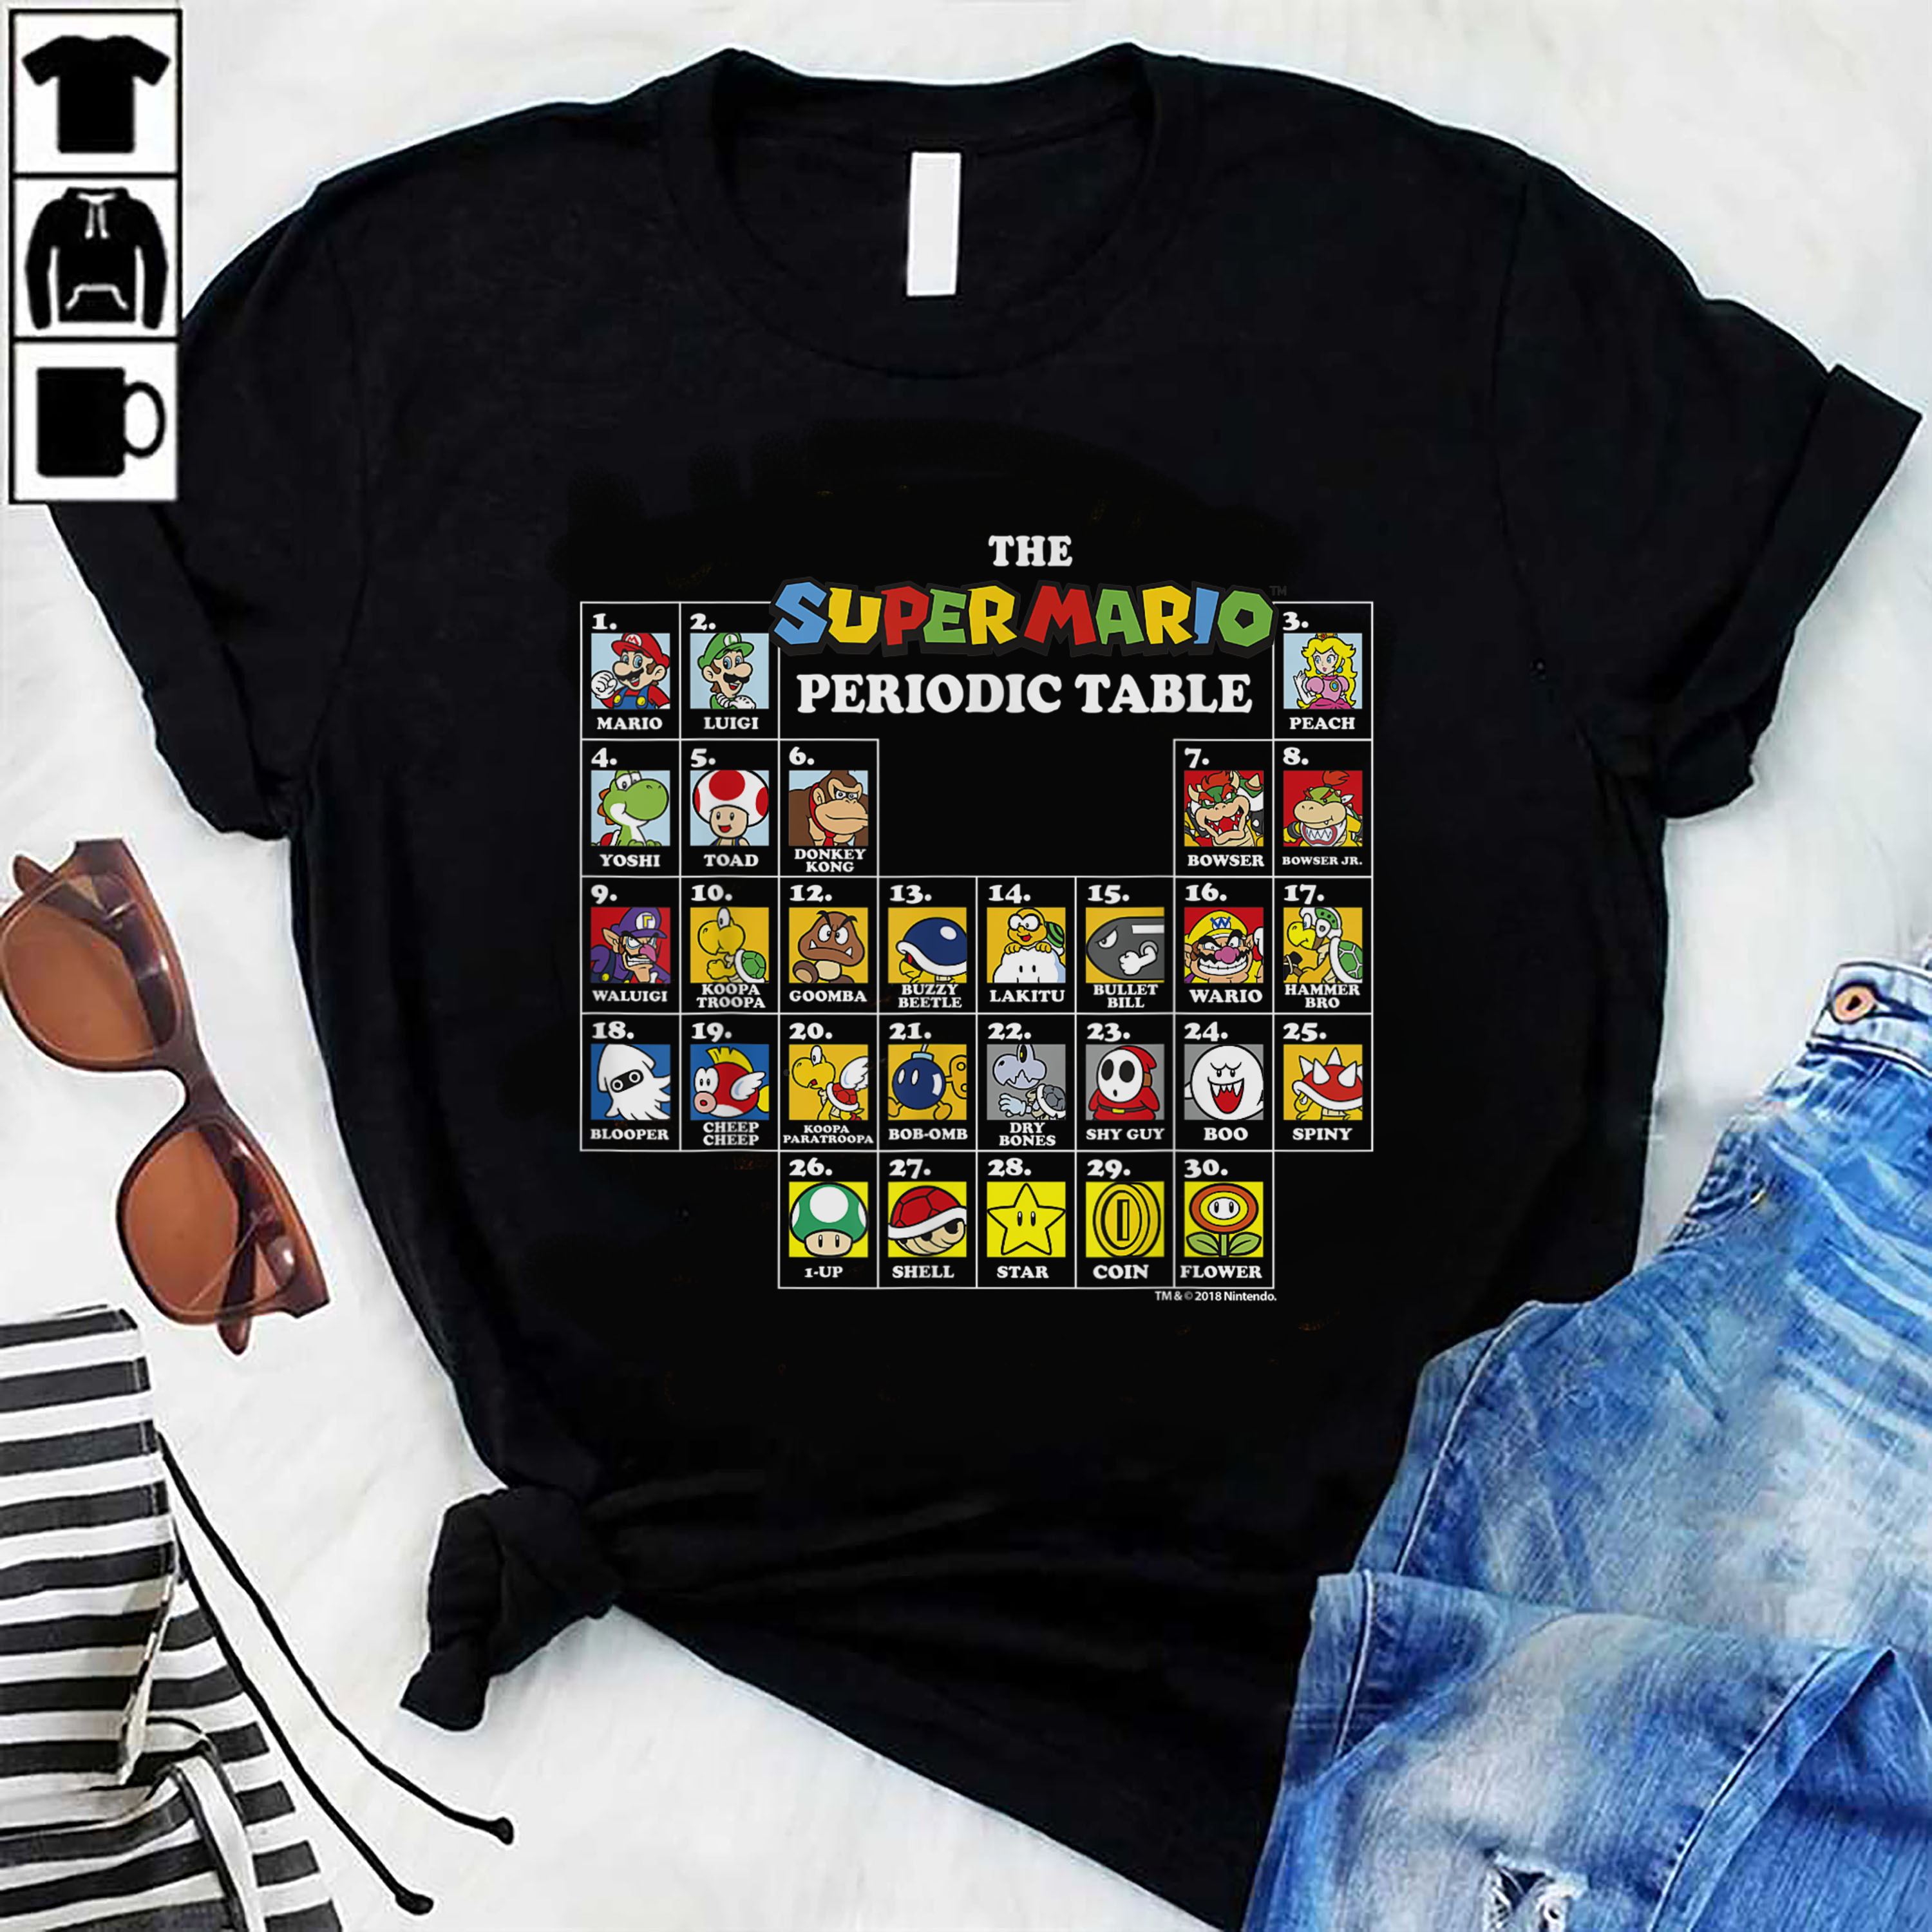 Periodic Table shirts, Chemistry shirt, science shirt, Super Mario Periodic Table Of Characters Graphic T-Shirt T-Shirt, Personalized gifts